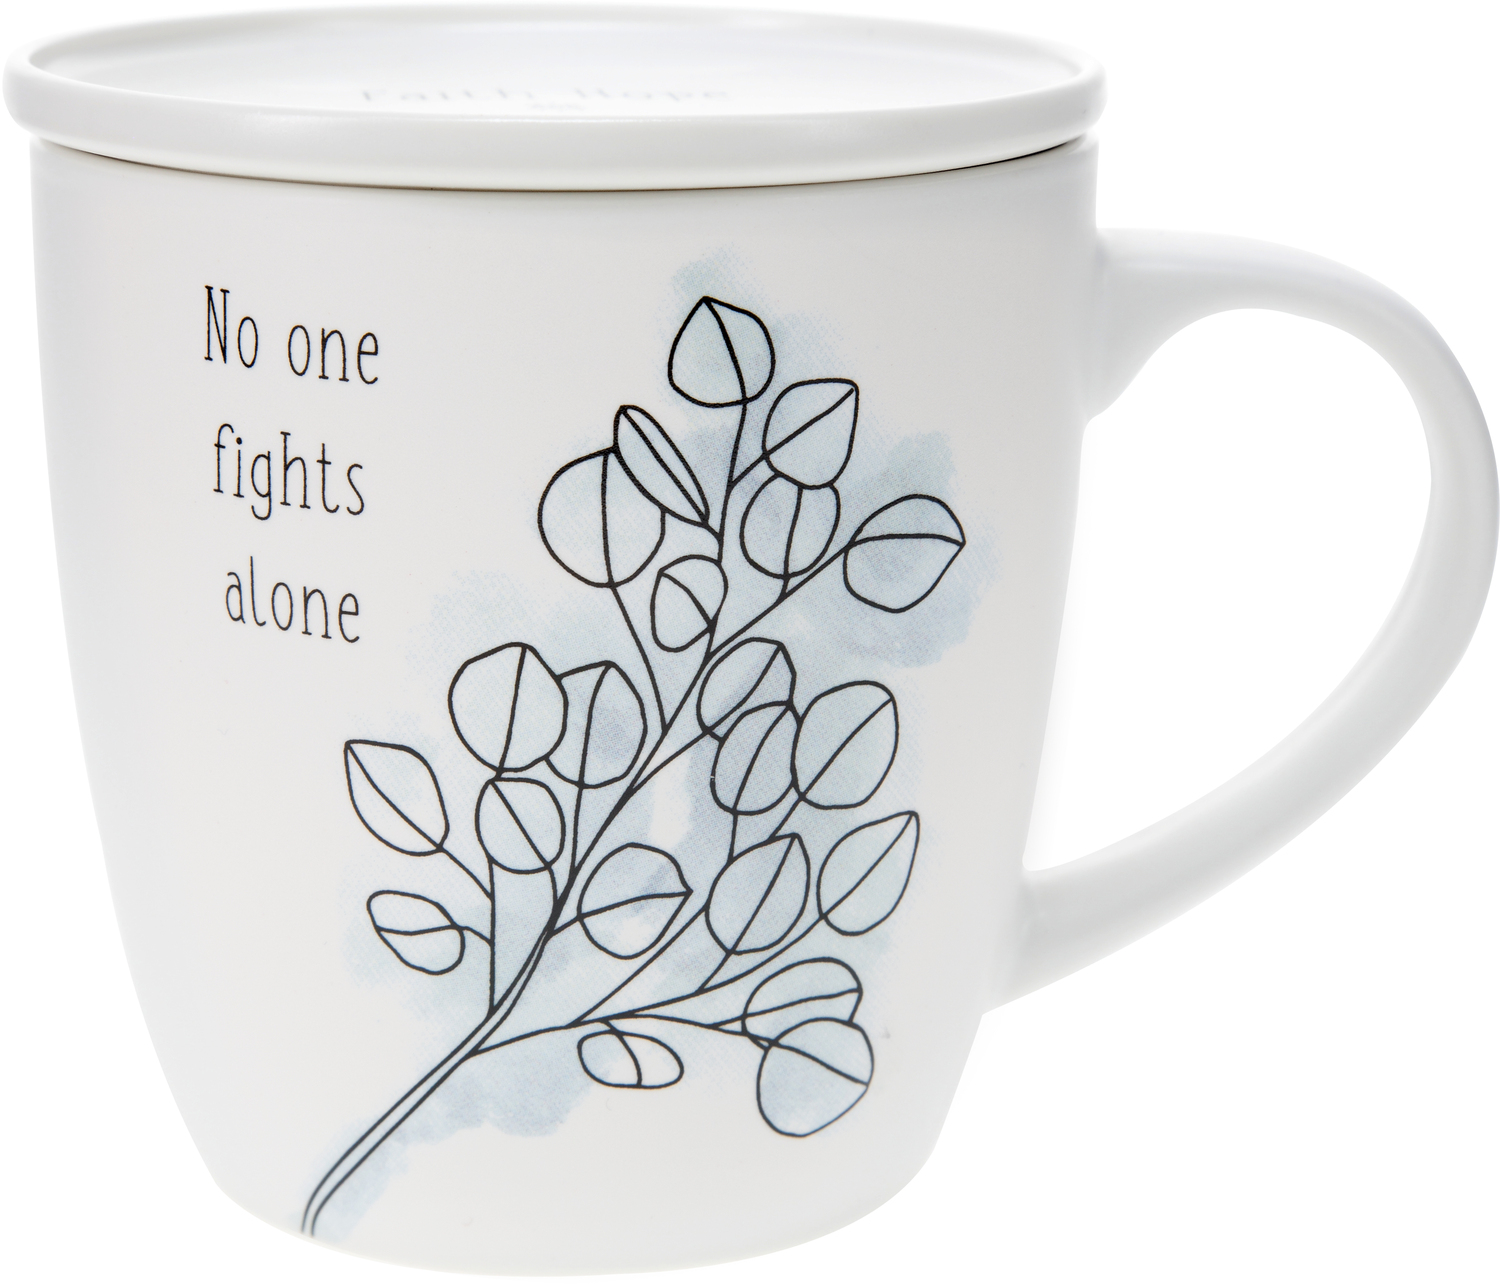 No One Fights Alone by Faith Hope and Healing - No One Fights Alone - 17 oz Cup with Coaster Lid